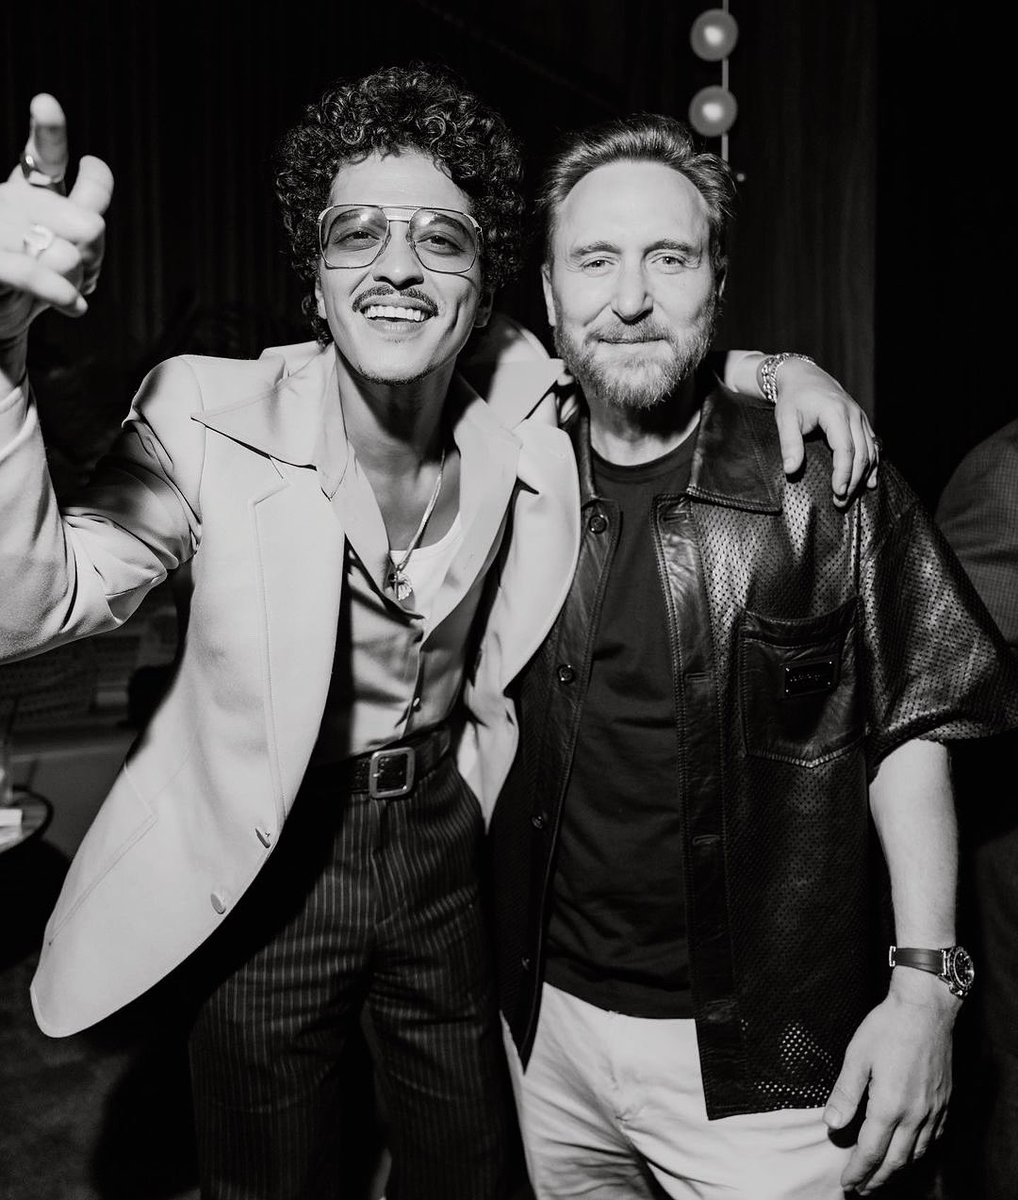 Bruno Mars with David Guetta at The Pinky Ring. 🤩🍸✨ Aawww, look at that beautiful smile 🥺❤️